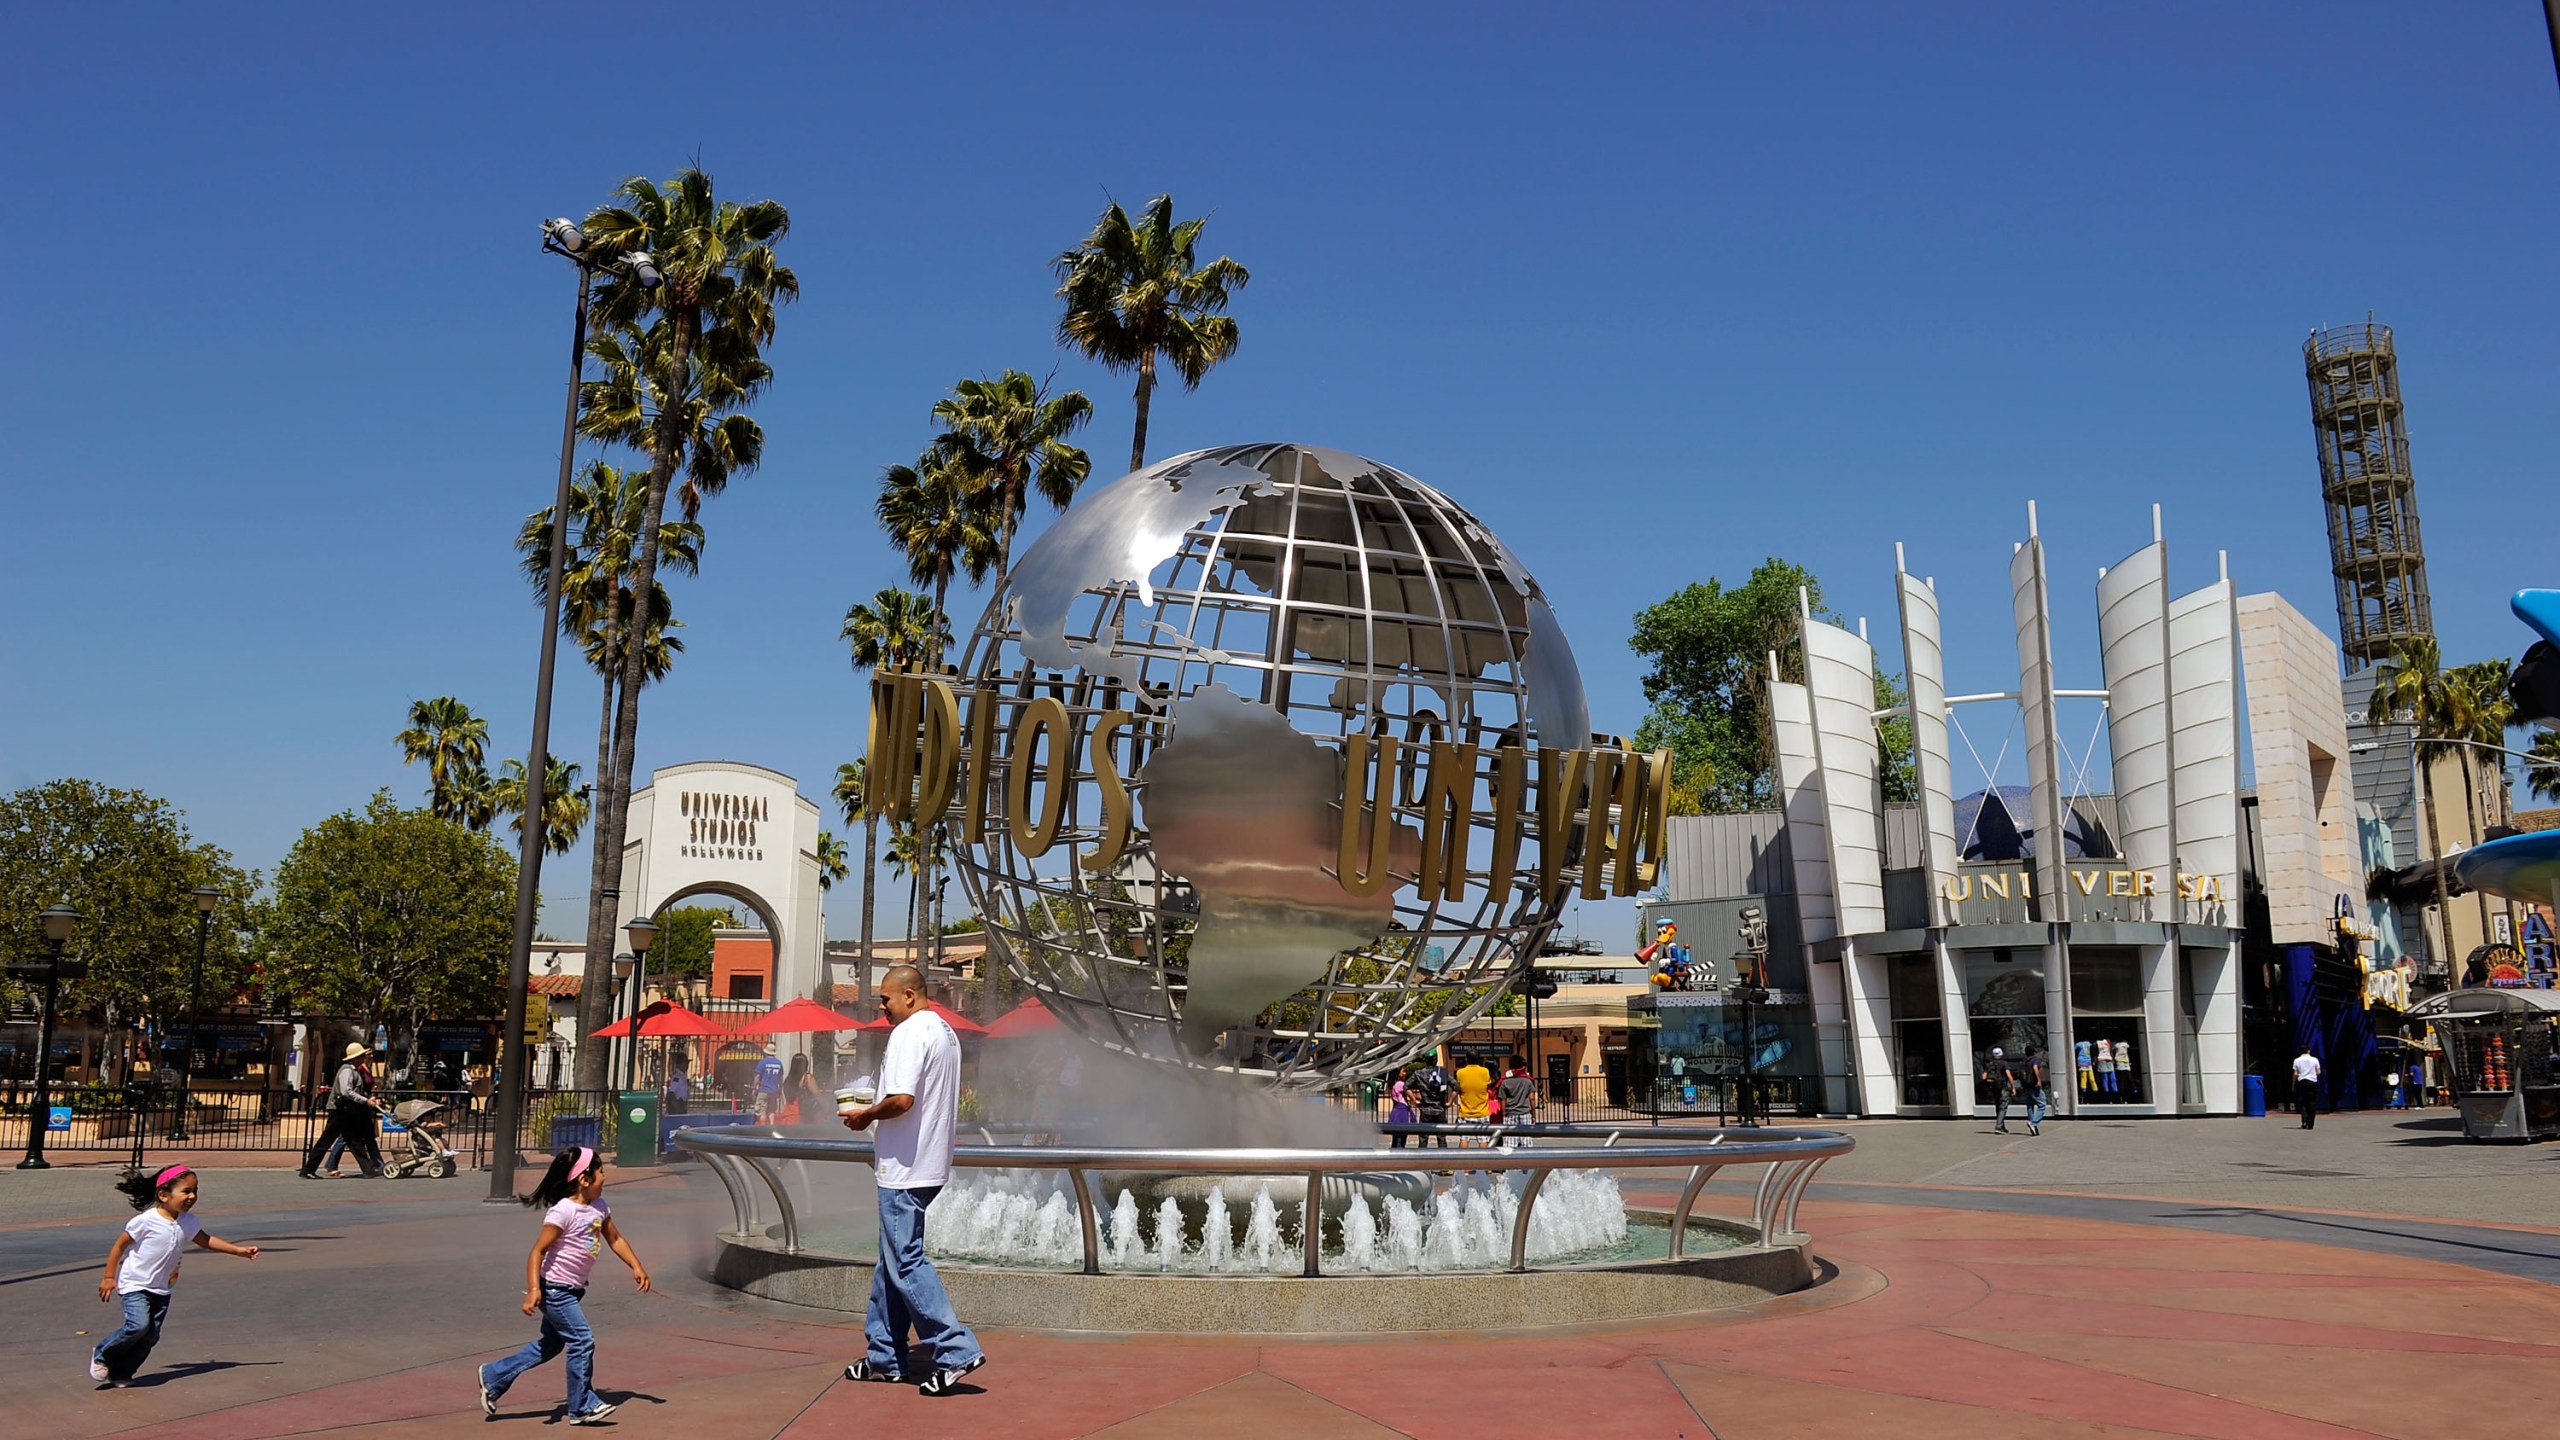 Toursits get their picture taken at the front entrance of Universal Studios Hollywood theme park on May 4, 2010. (Kevork Djansezian/Getty Images)